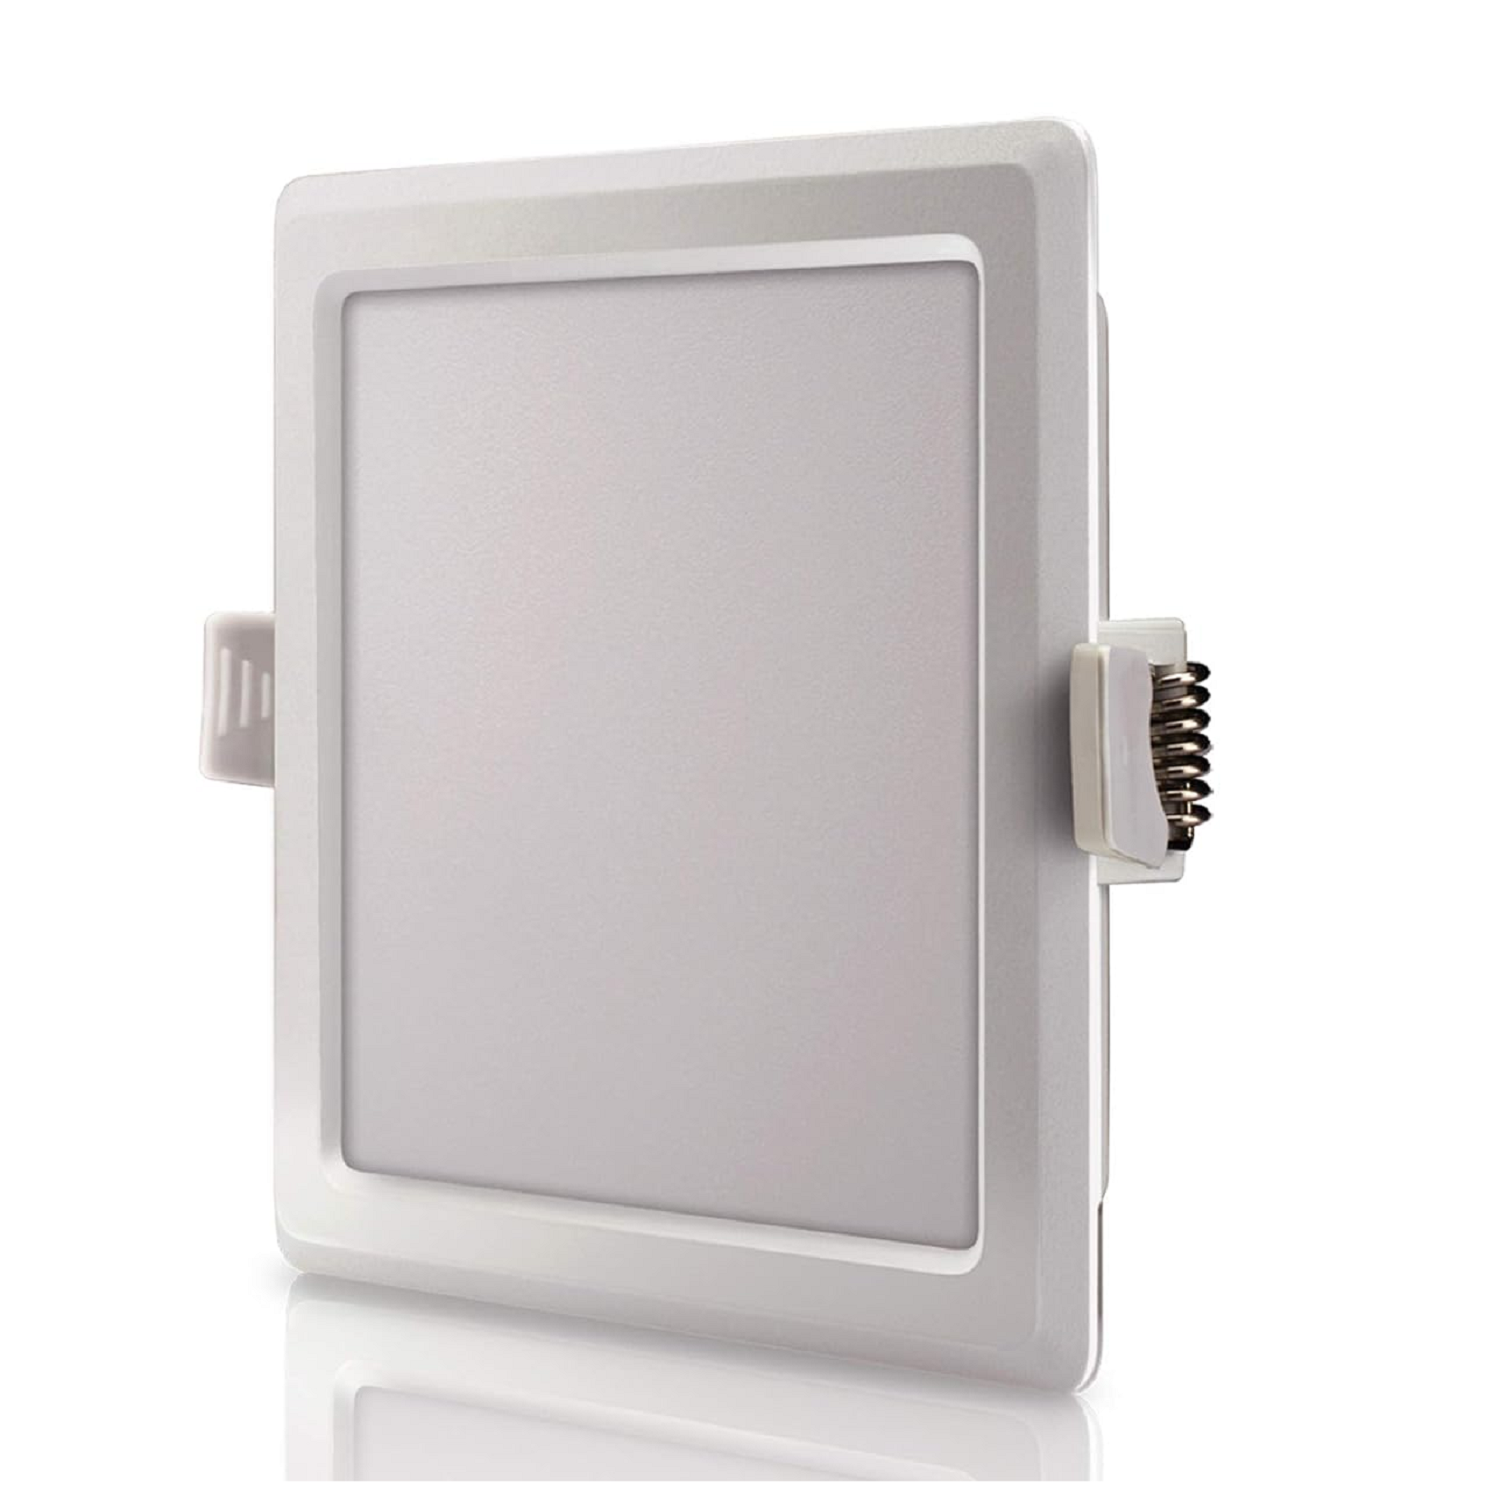 Syska  12 W Polycarbonate and Die Cast Aluminium Square LED Slim Recessed Panel Cool Day Light